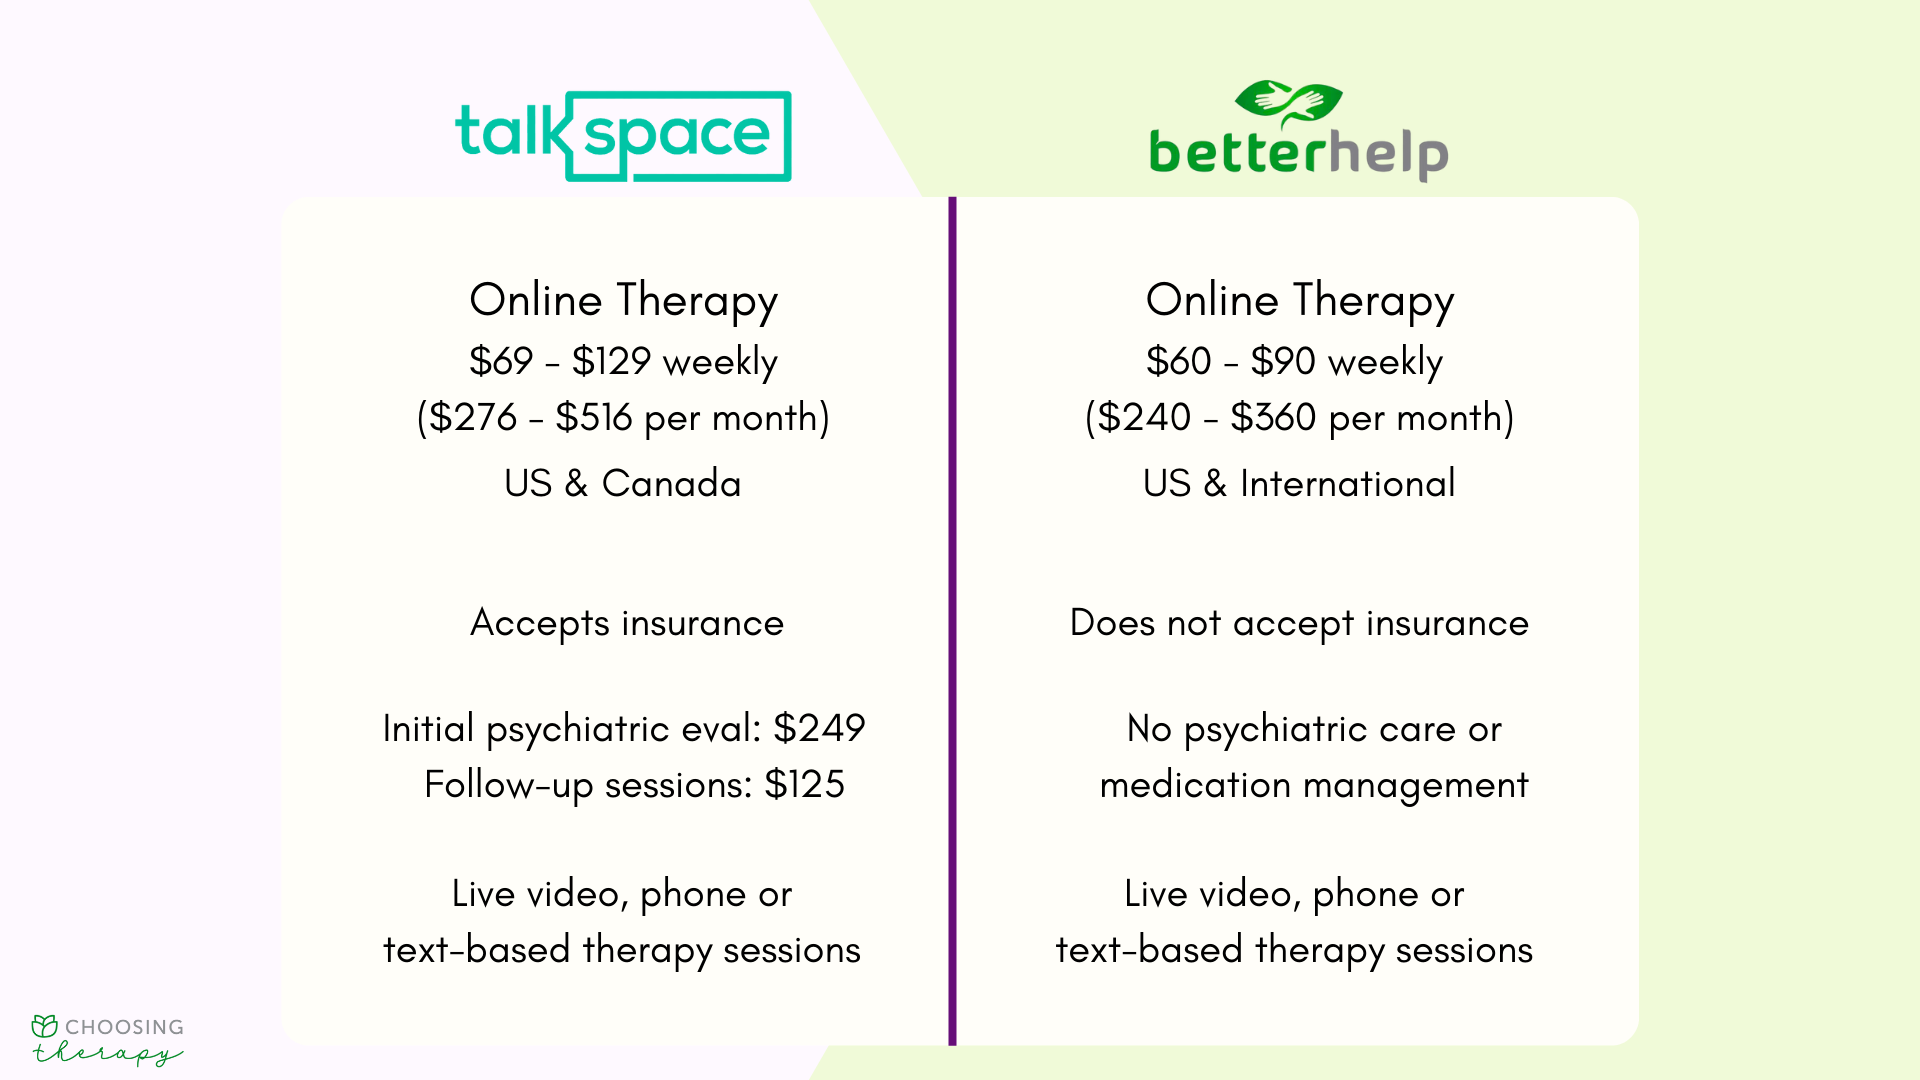 Talkspace vs BetterHelp high-level summary of services and costs.